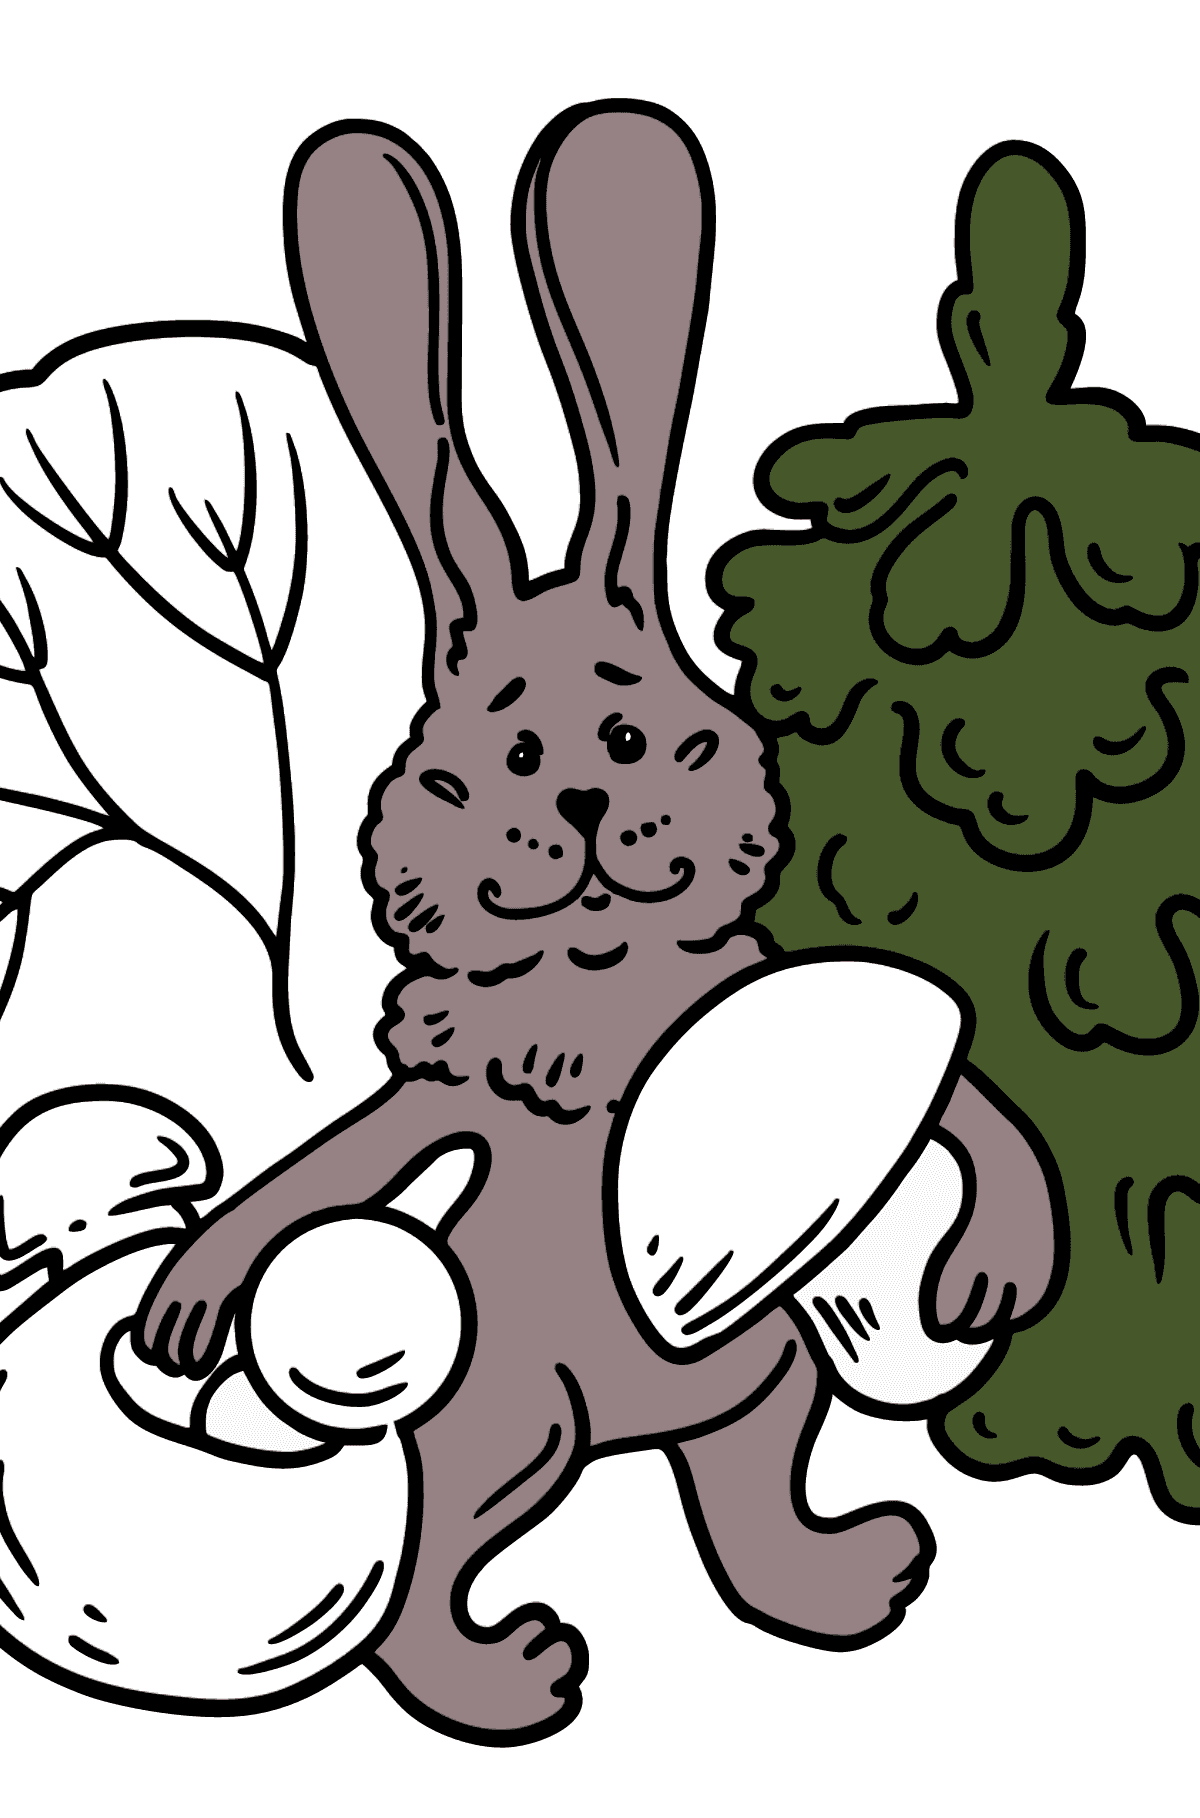 Bunny in the Forest coloring page - Coloring Pages for Kids